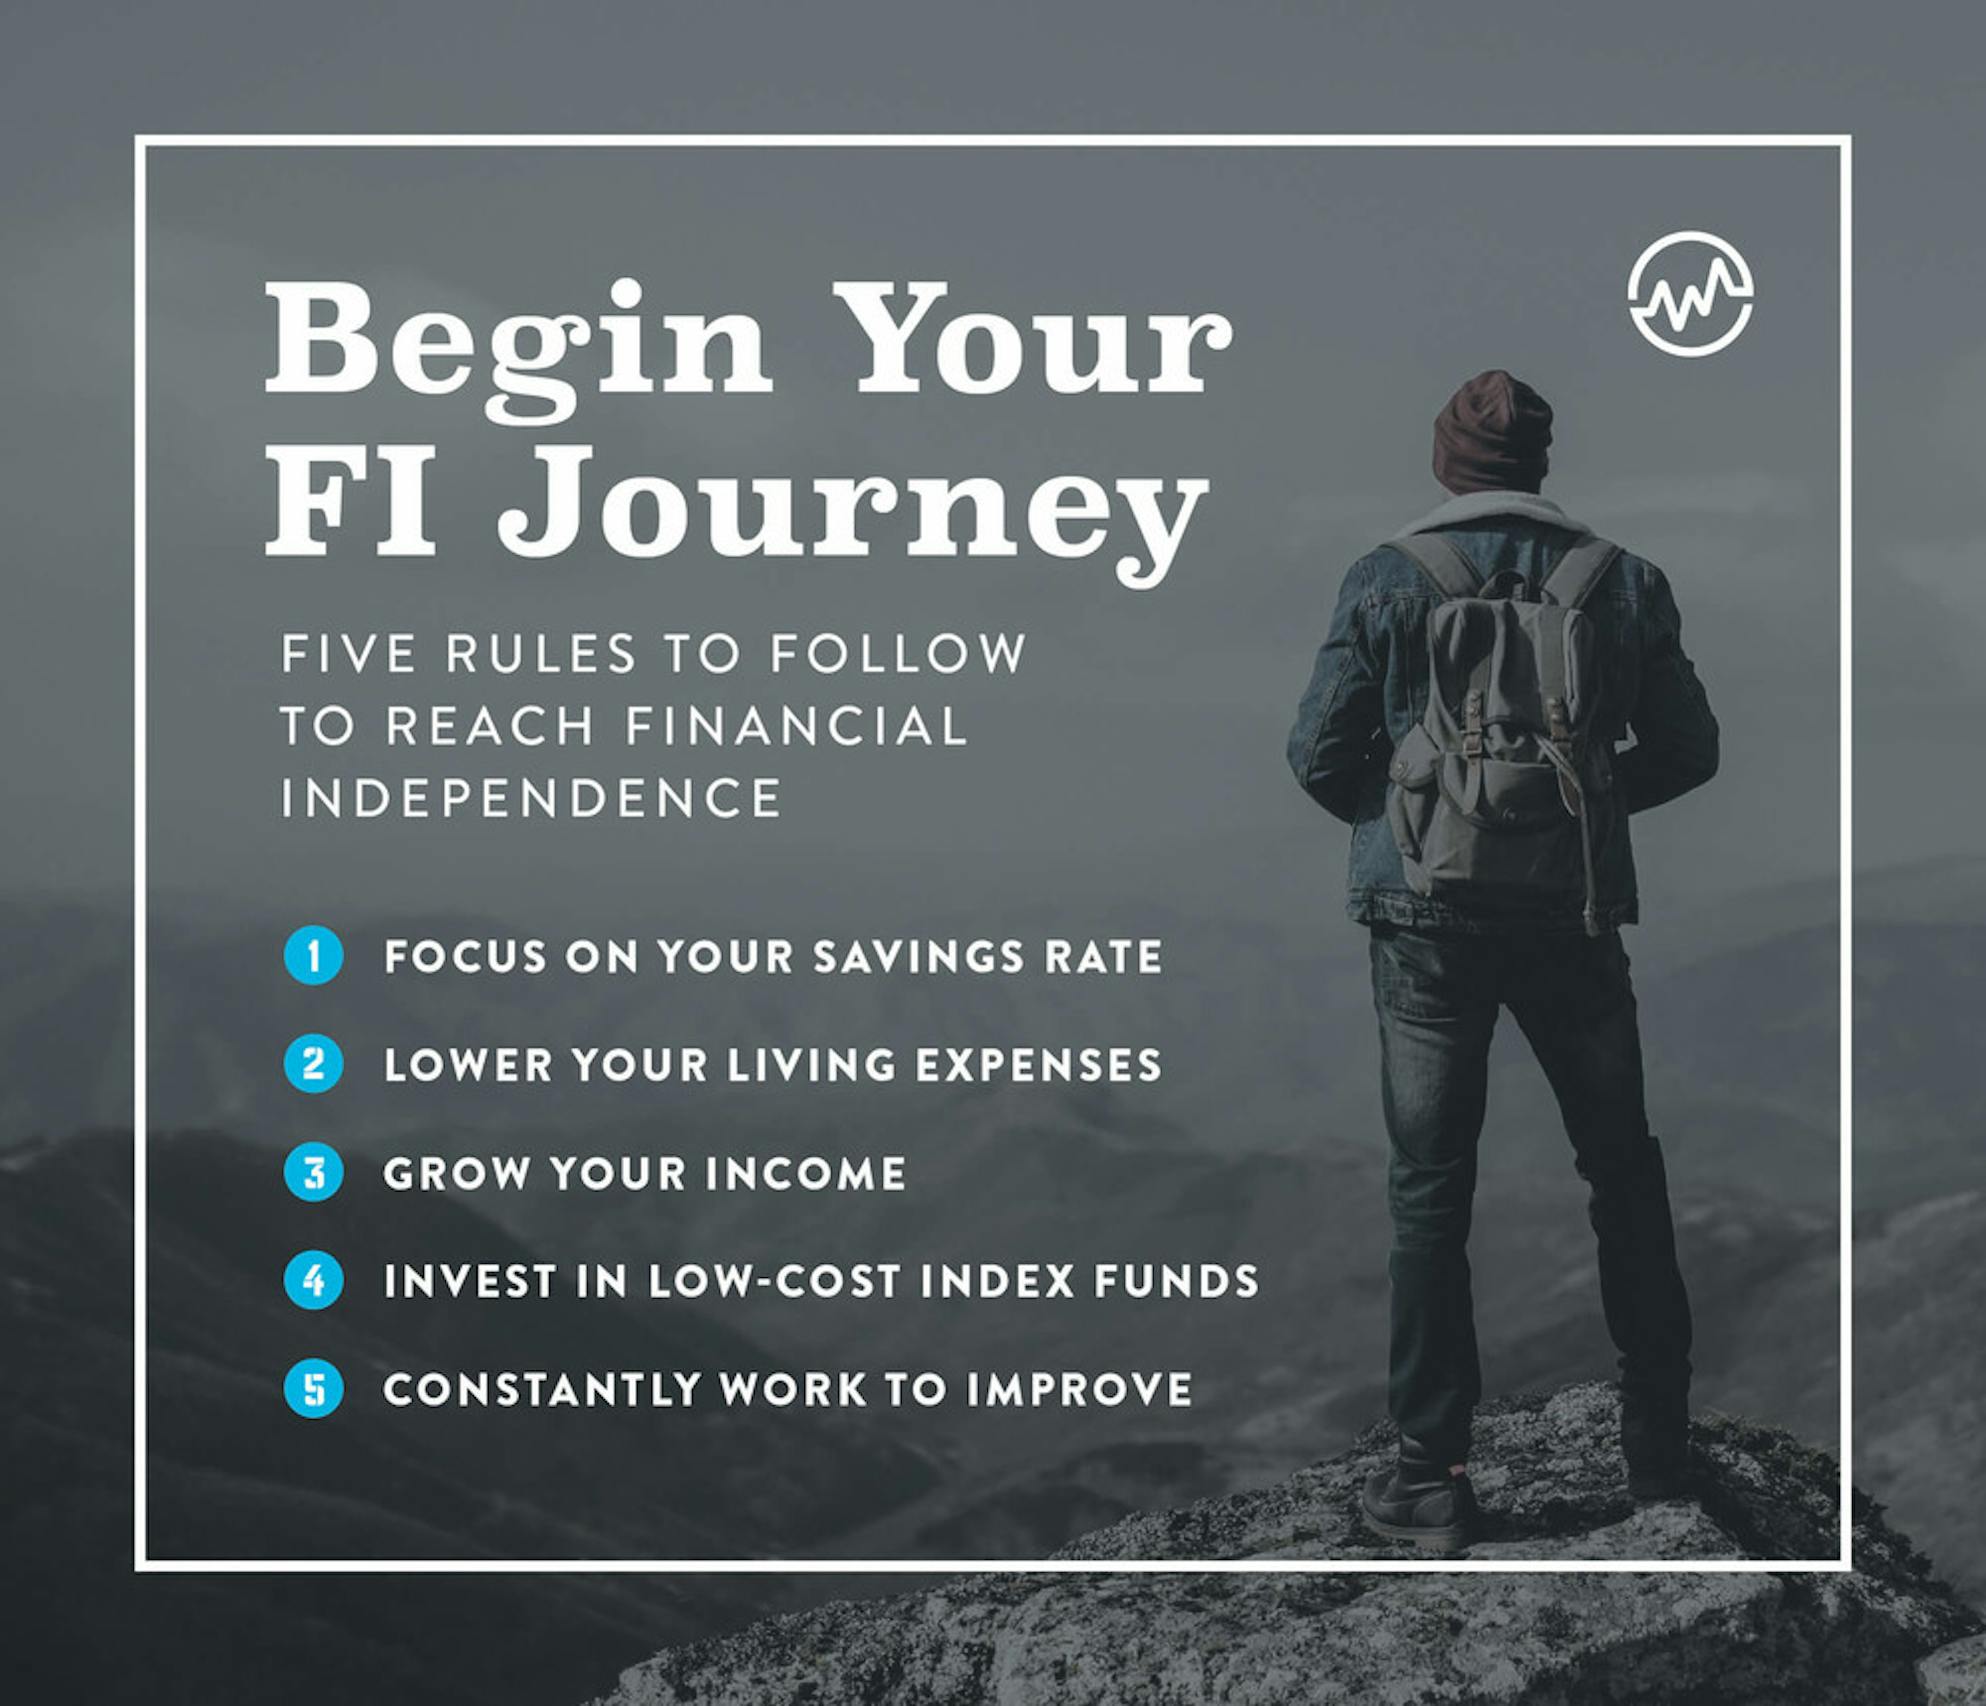 Begin your financial independence journey